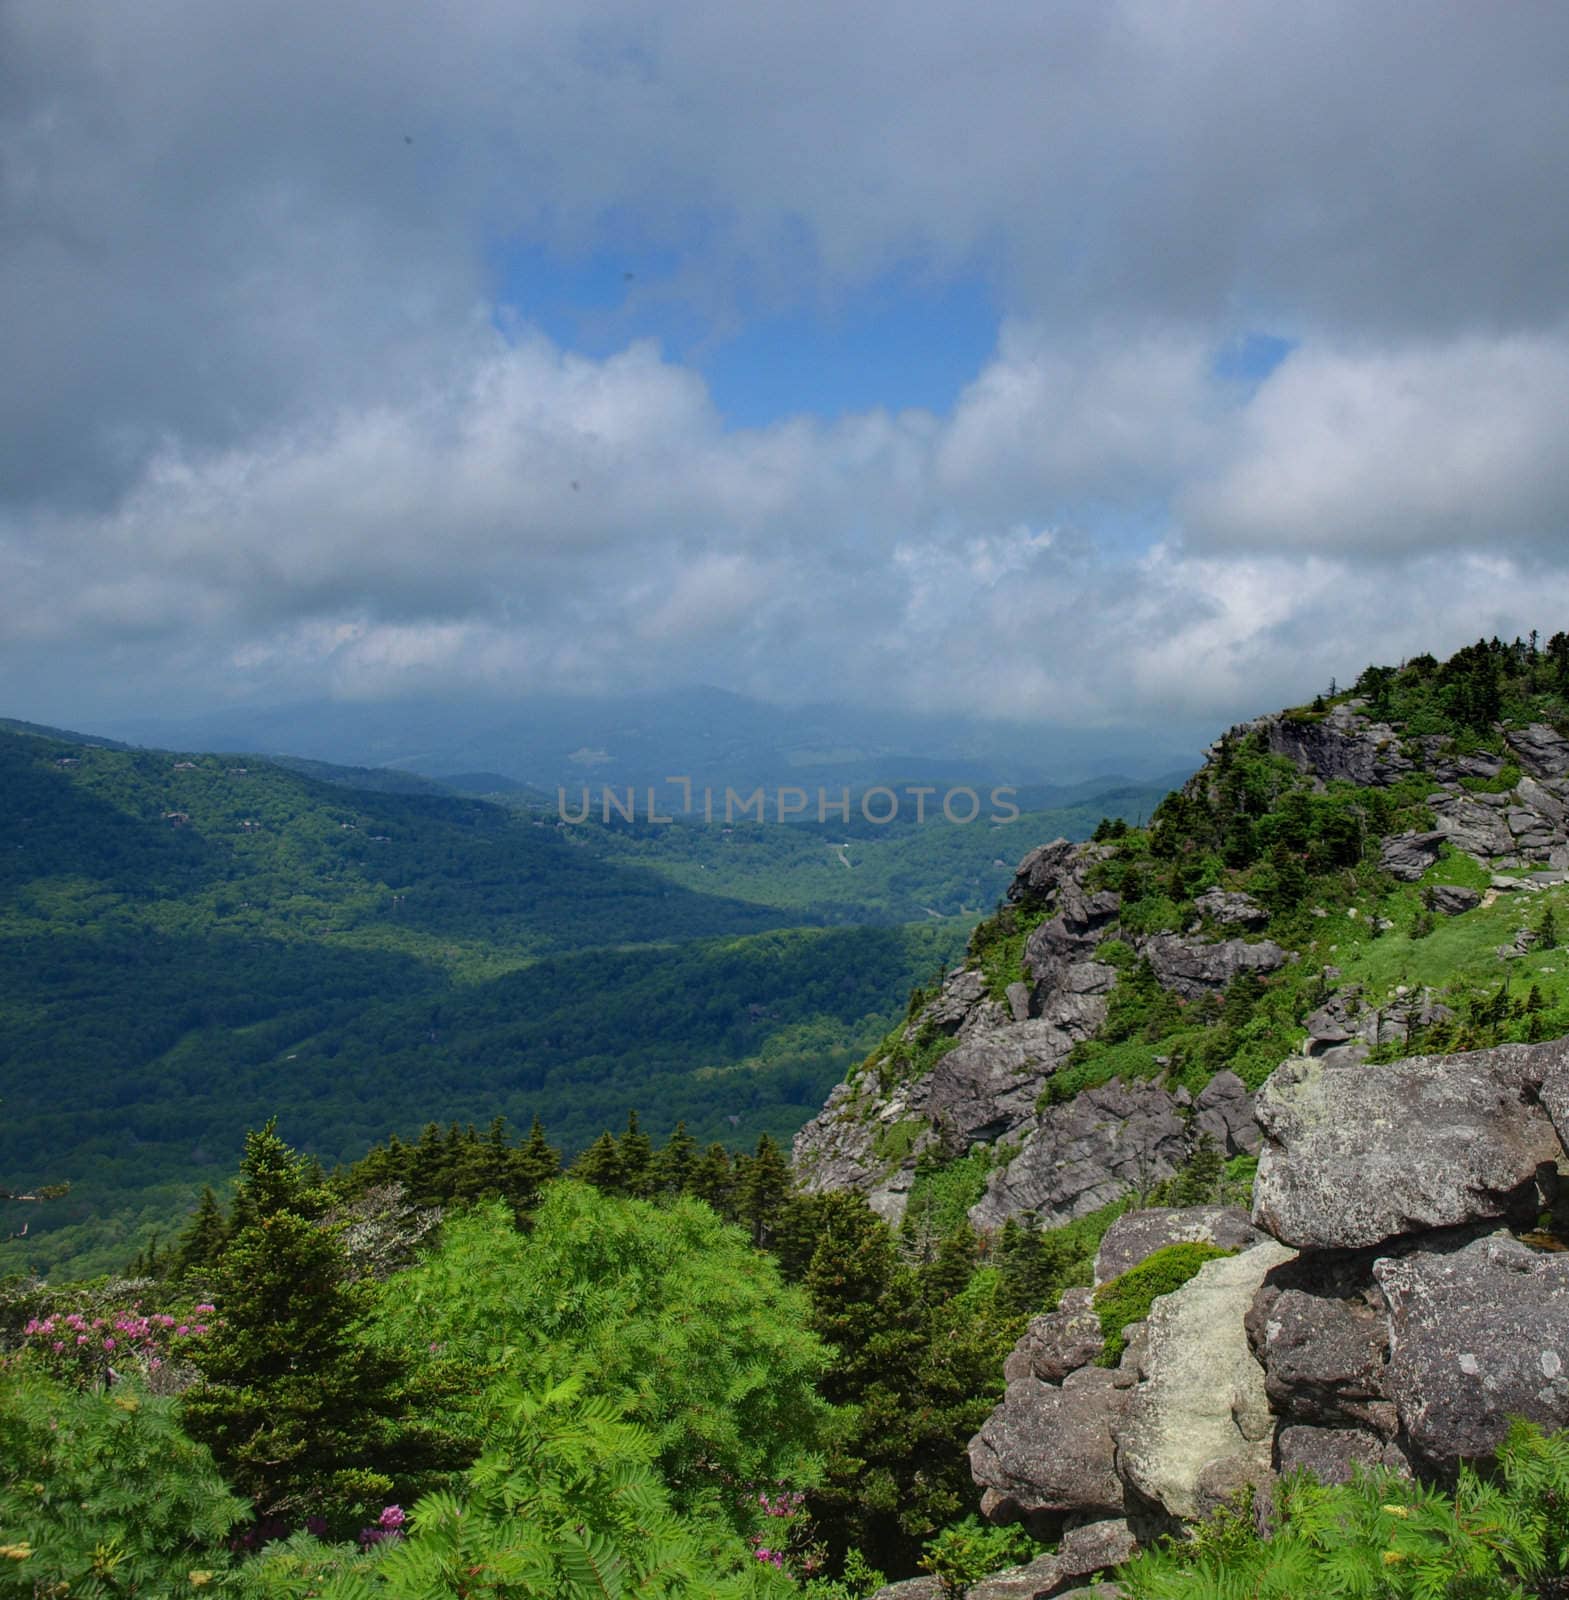 View seen from Grandfather Mountain Sate Park in North Carolina